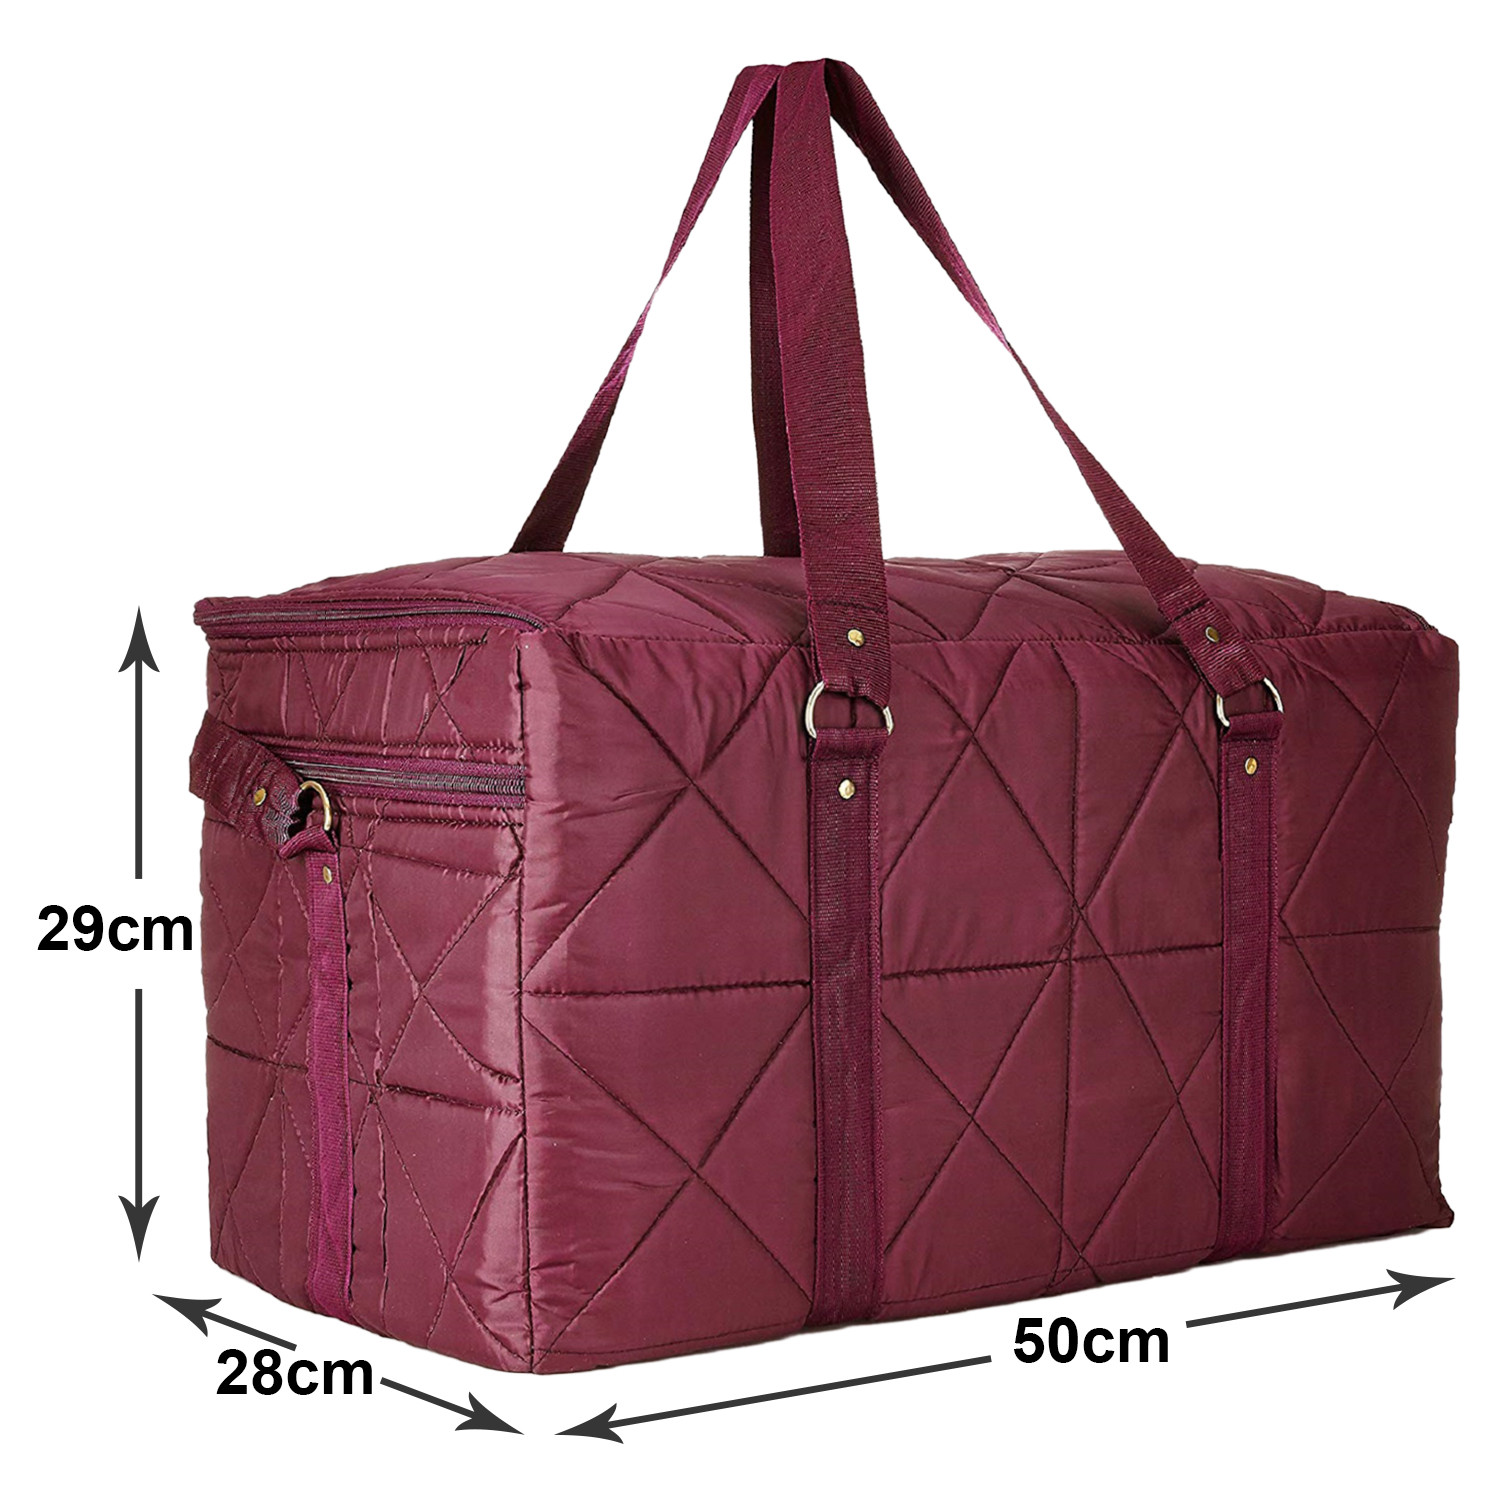 Kuber Industries Parachute Foldable Duffle Bag/Bag Packs With Handle For Traveling (Maroon)